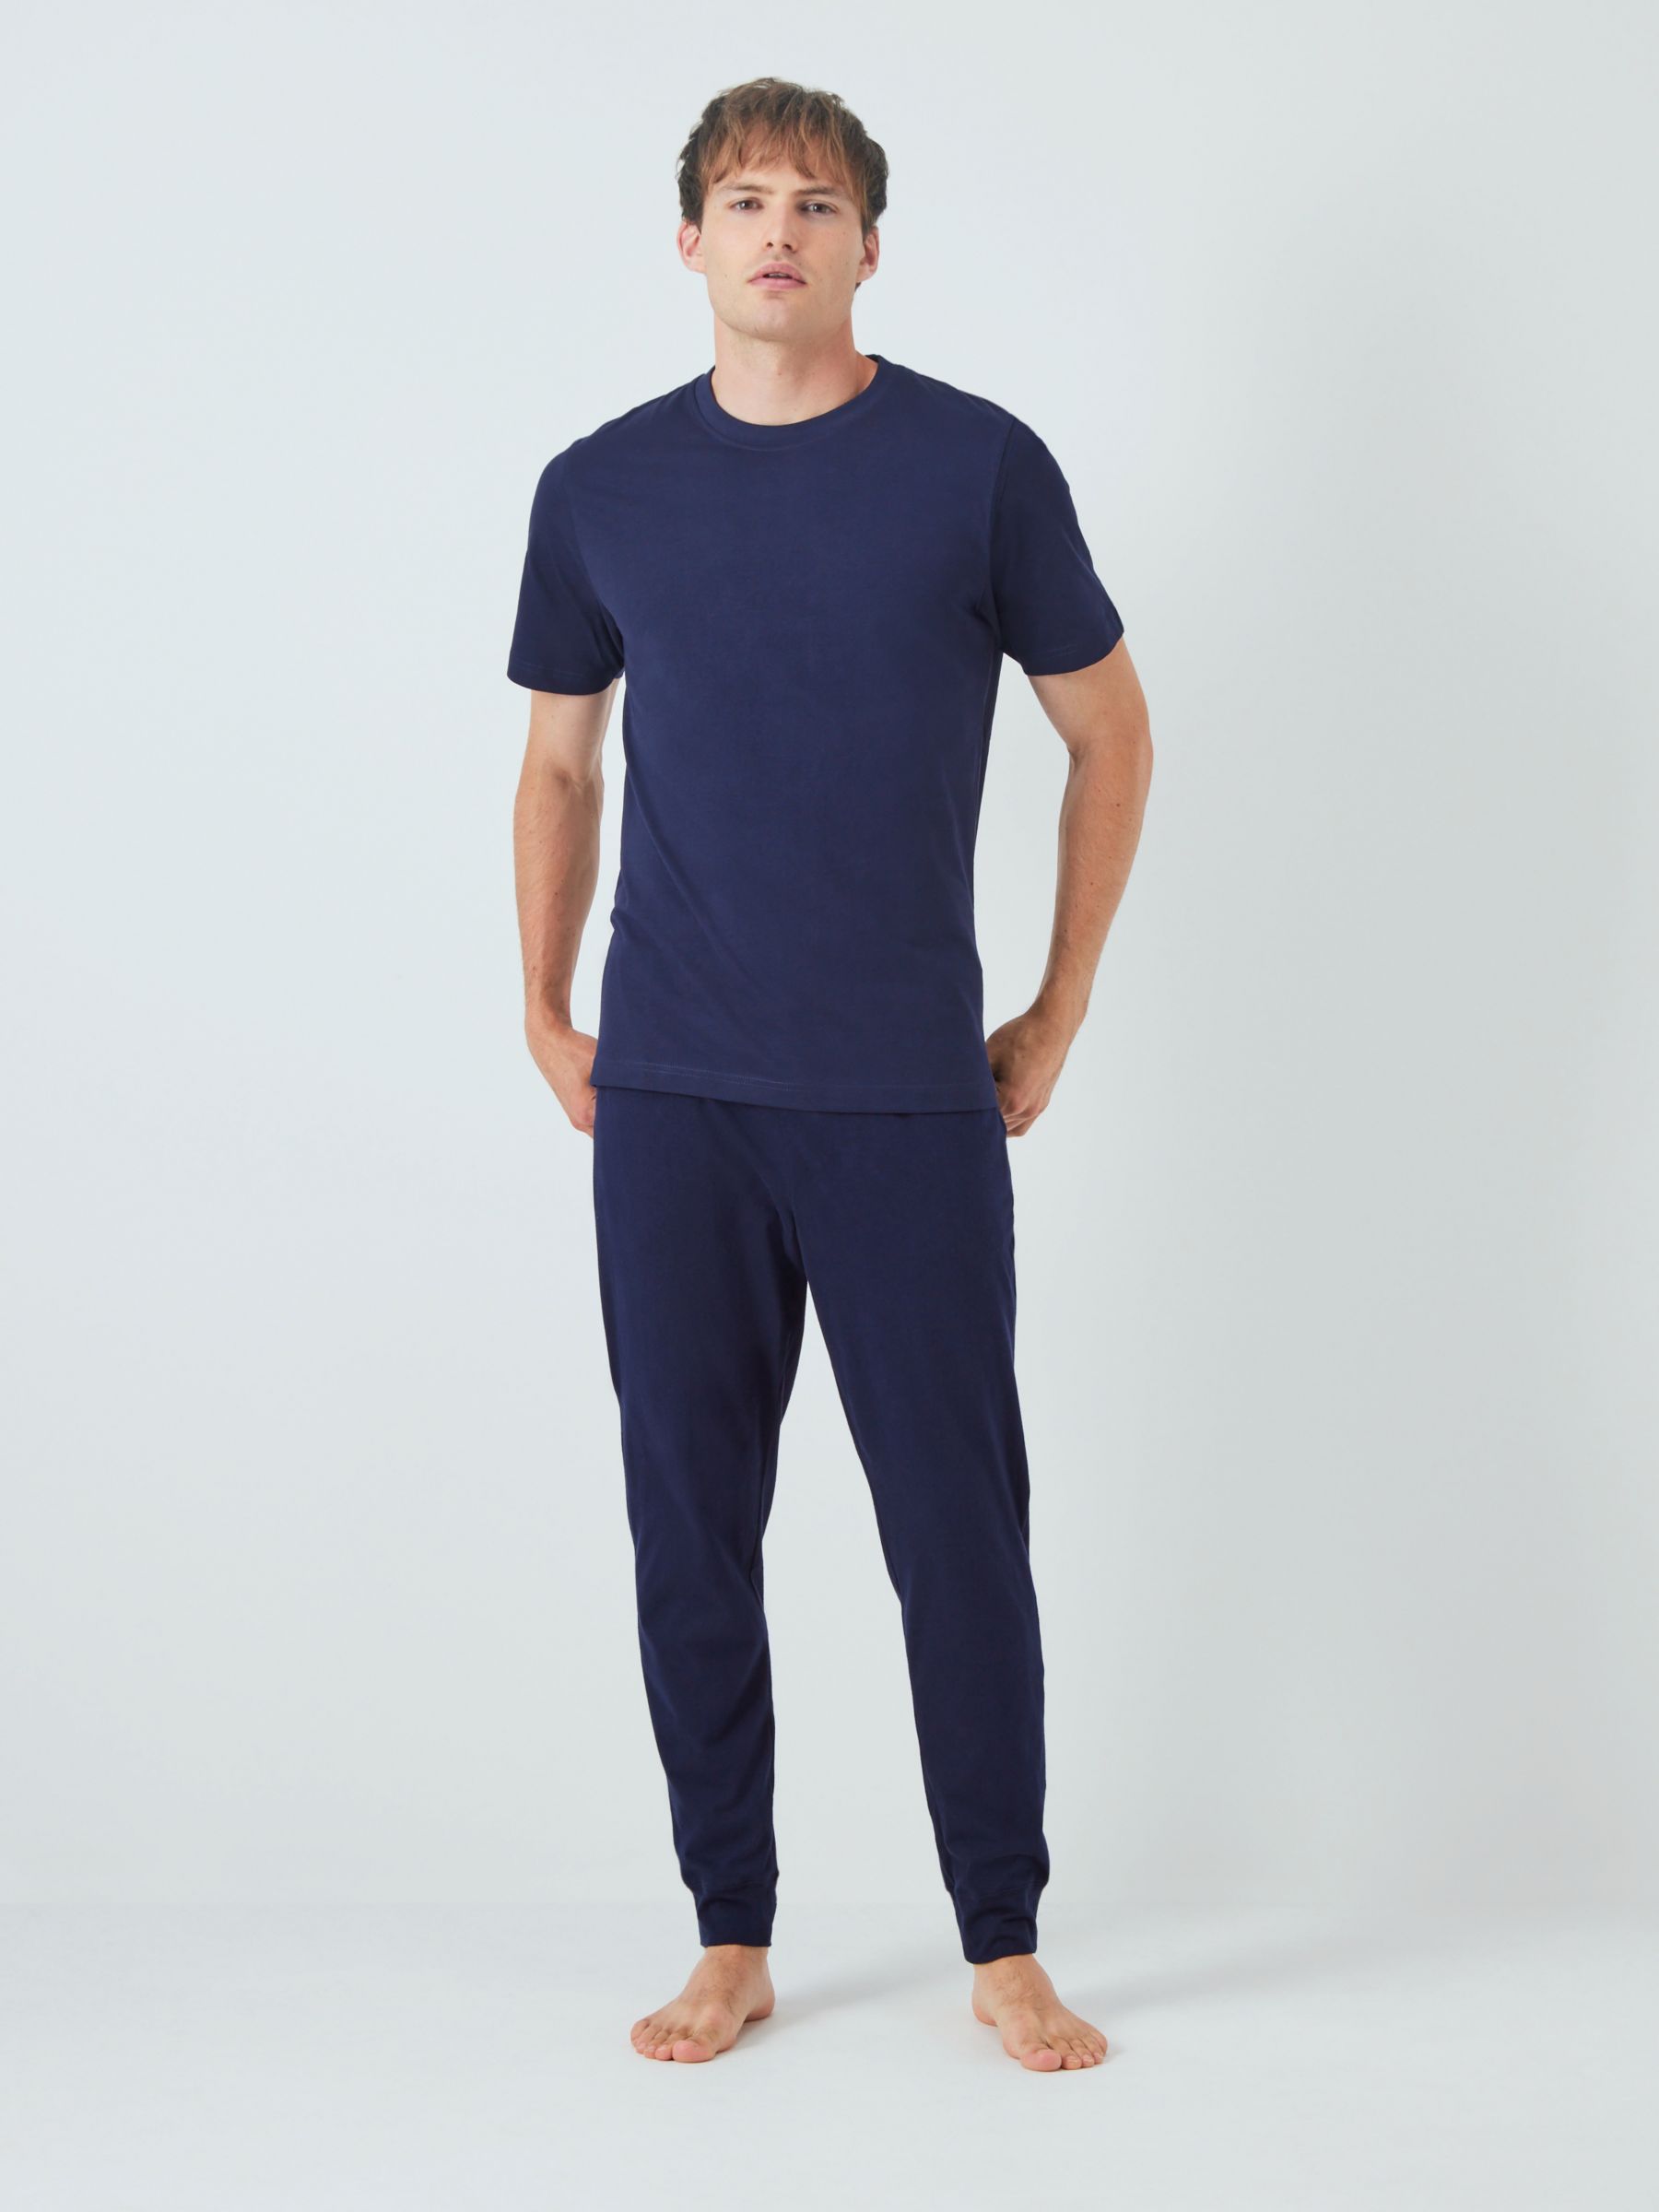 John Lewis ANYDAY Cotton Jersey Joggers, Pack of 2, Navy/Grey, XL